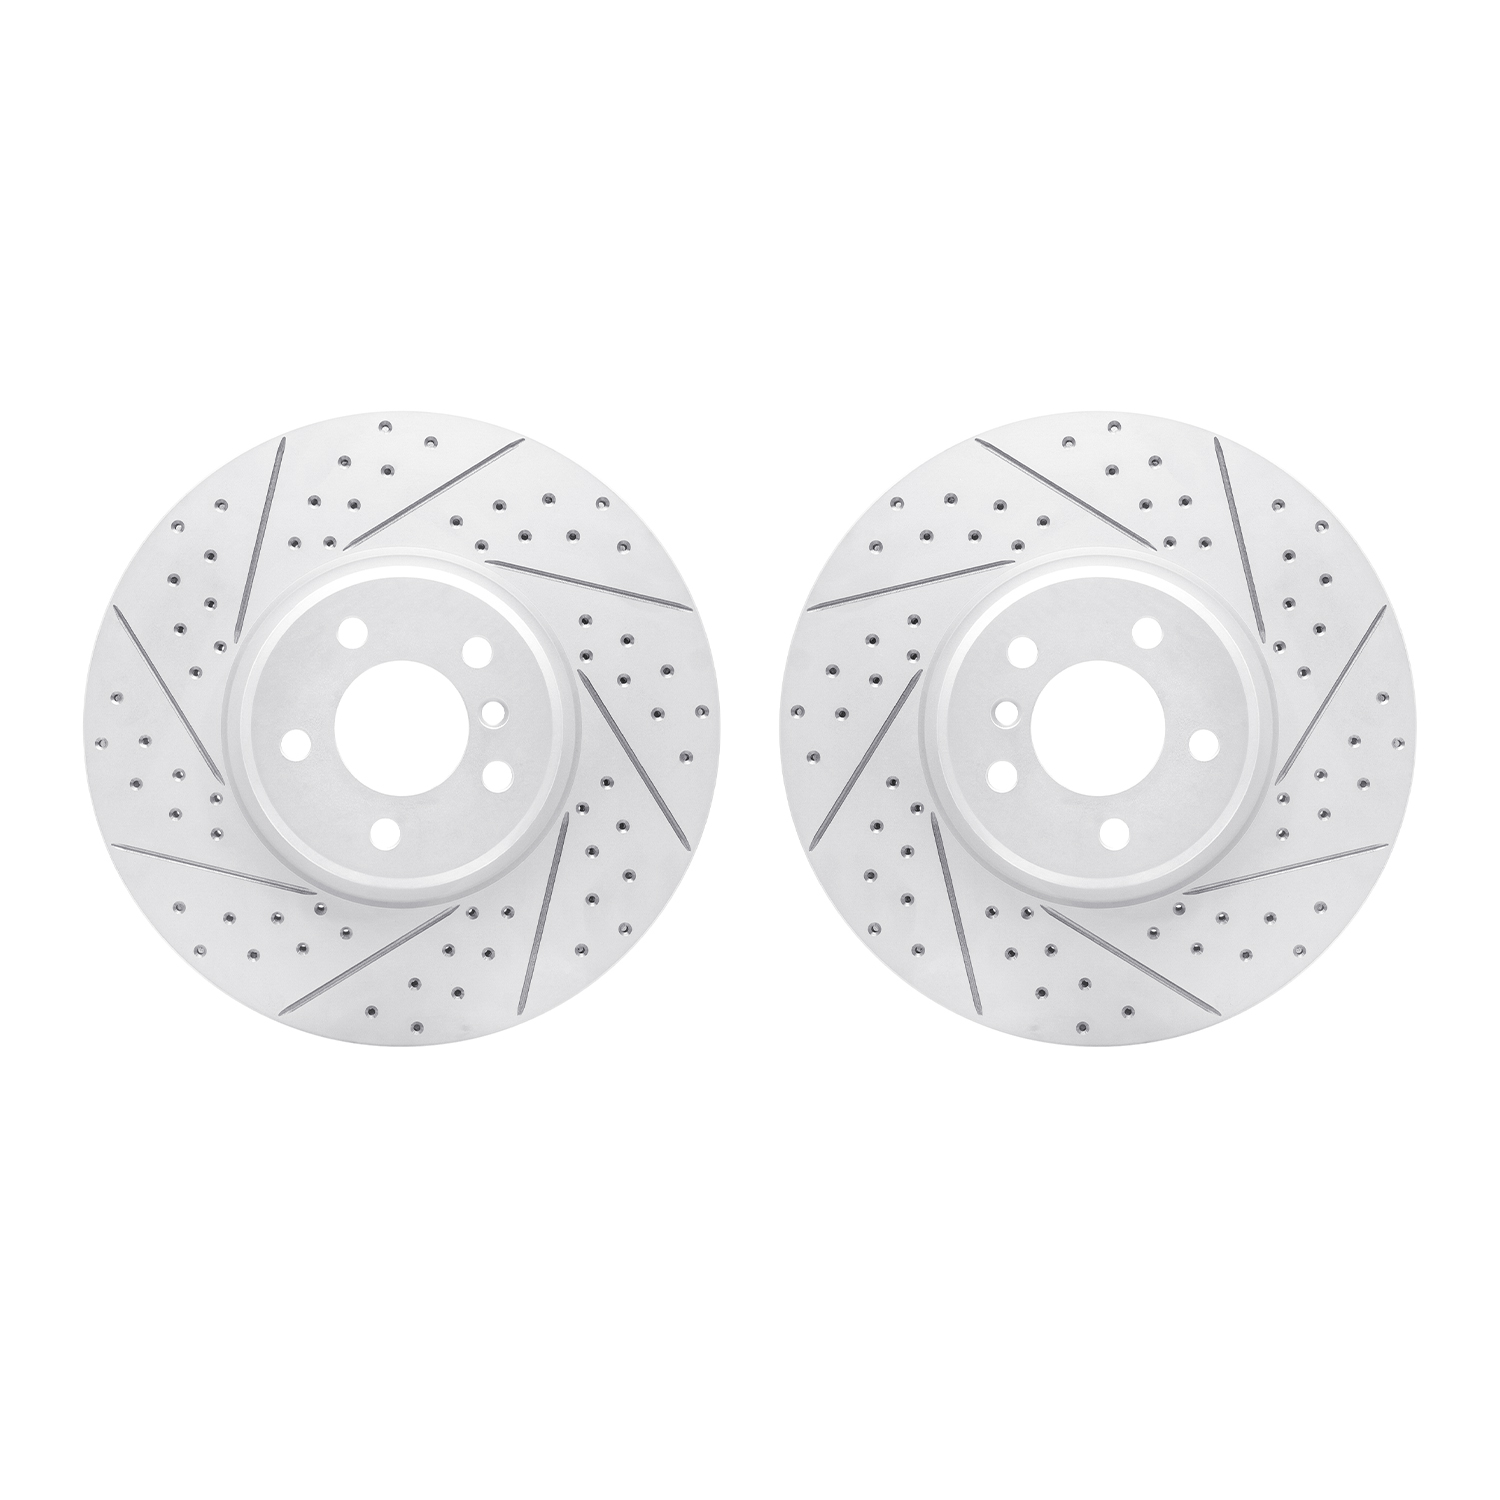 2002-31048 Geoperformance Drilled/Slotted Brake Rotors, 2008-2019 BMW, Position: Front